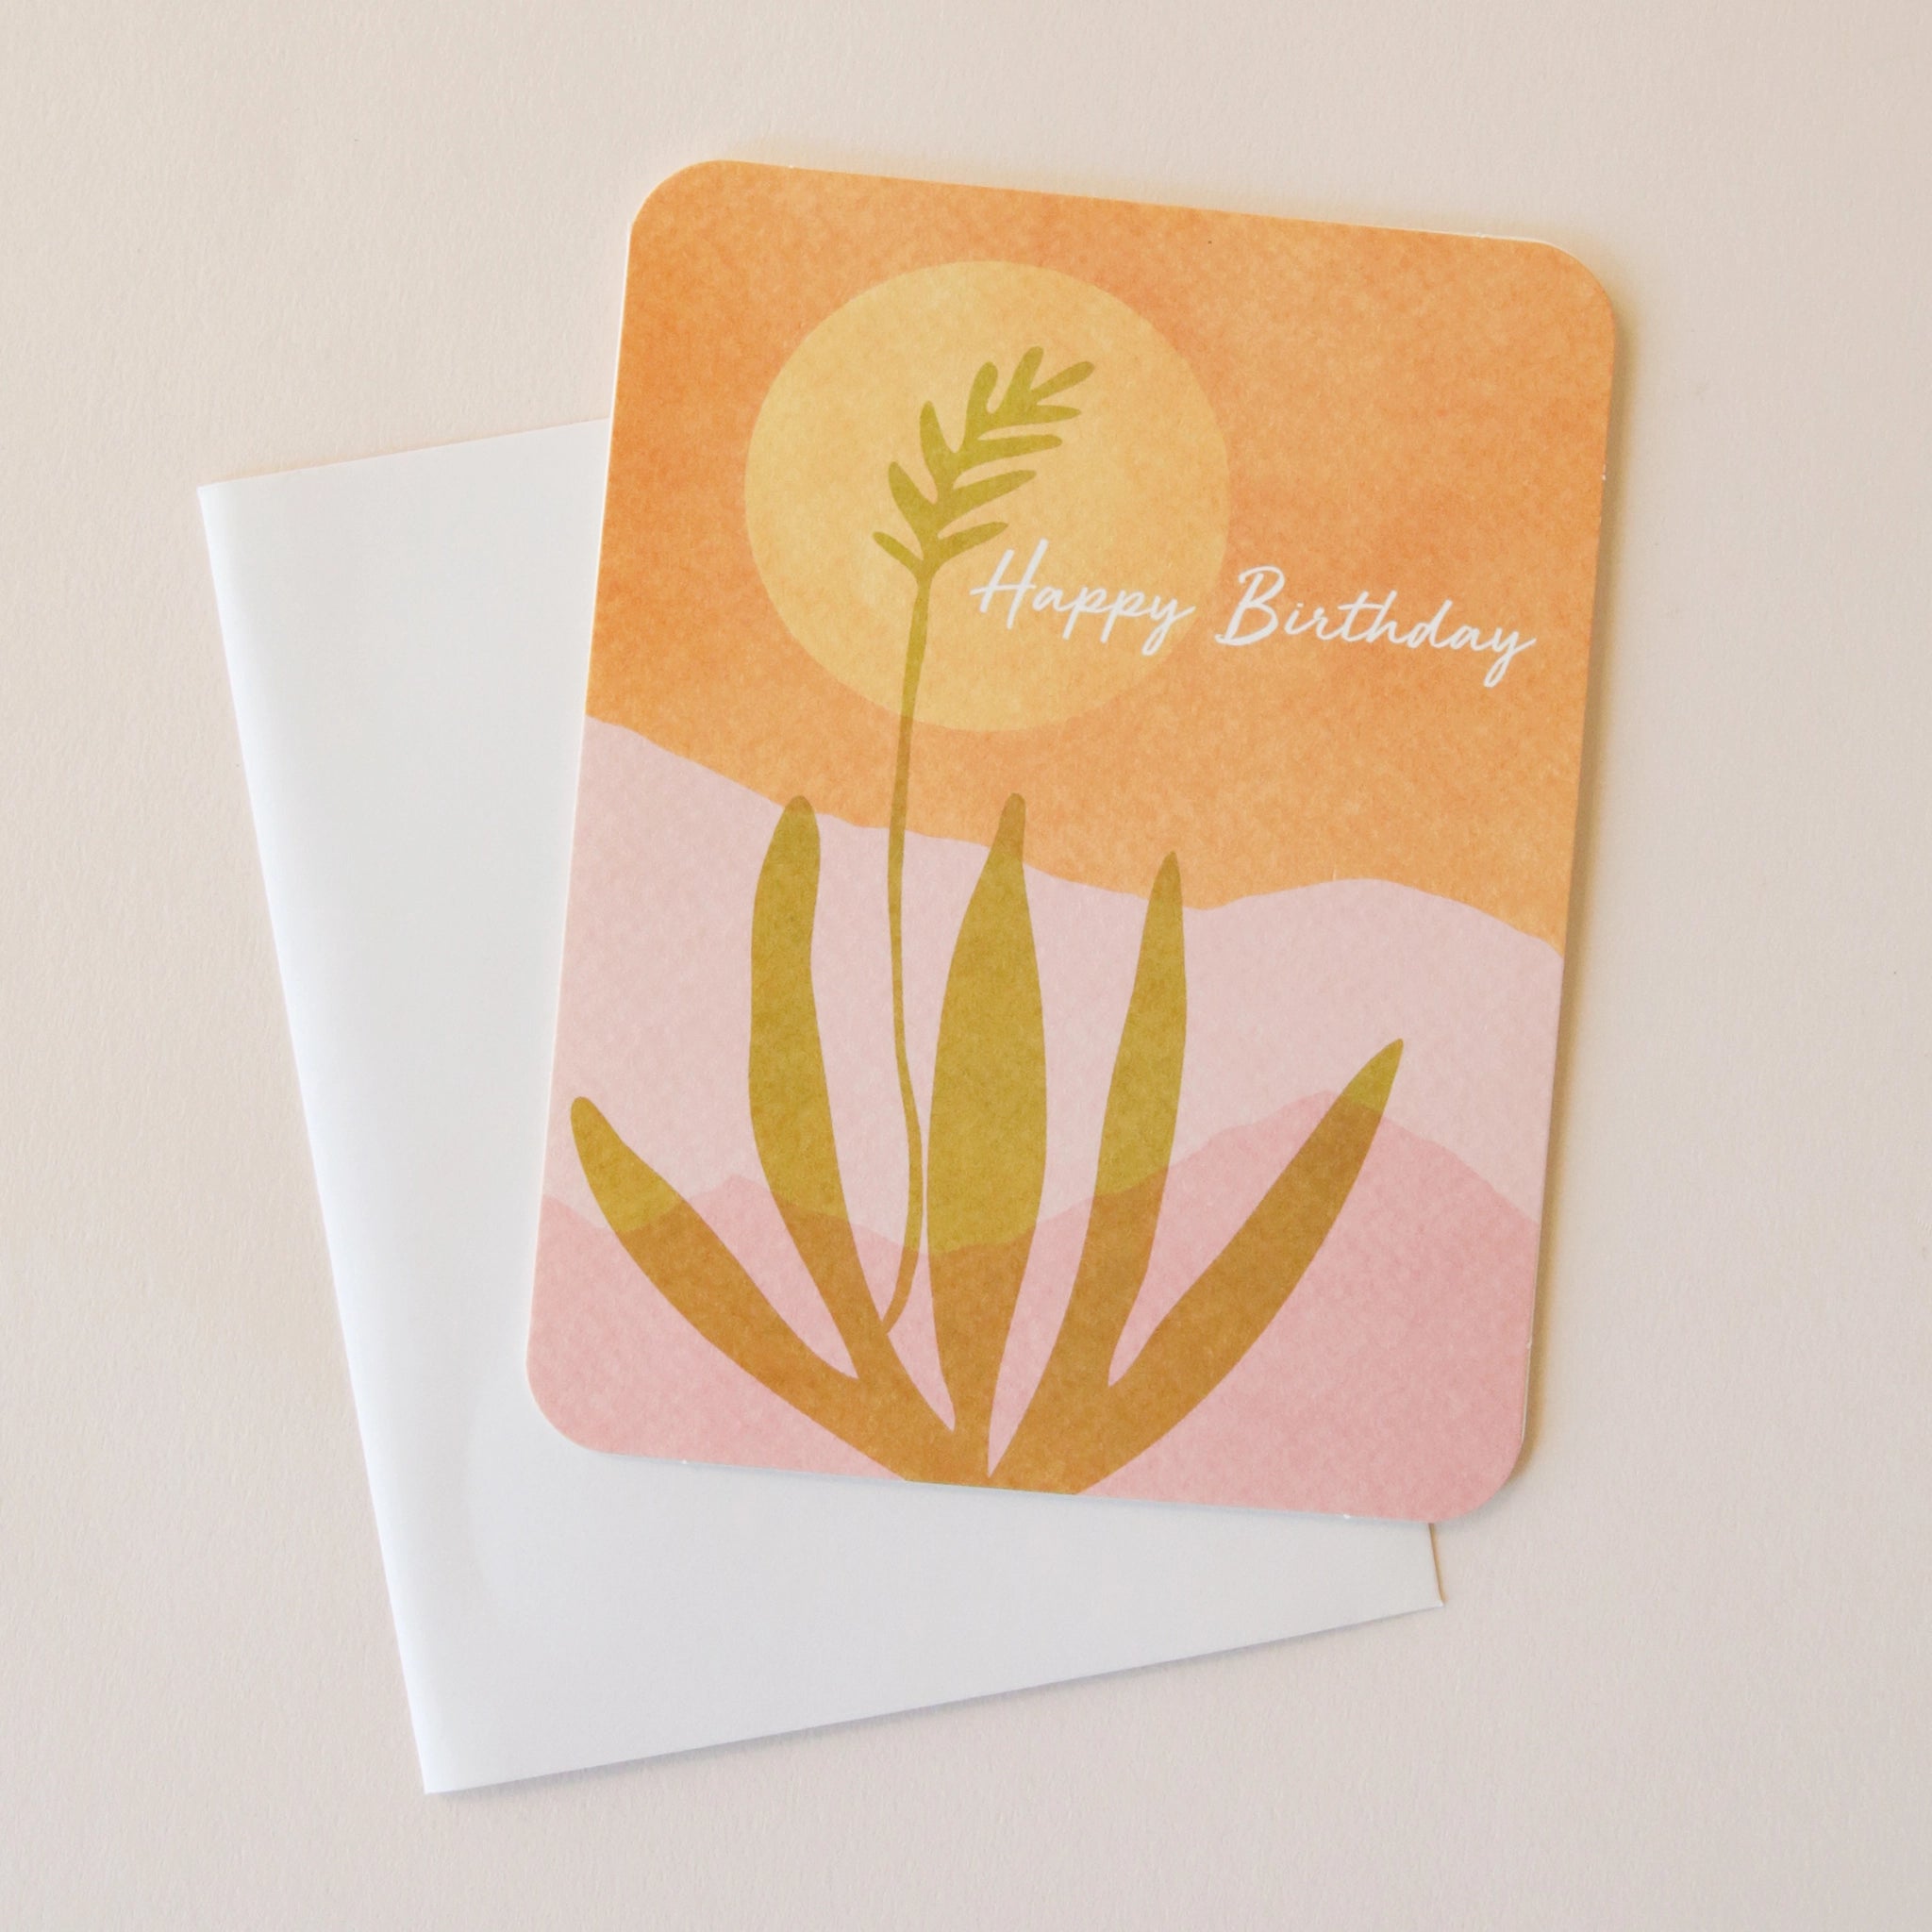 A card with a desert scape illustration with an aloe plant, an orange sky, a yellow sun and a pink mountainous background and white text that reads, "Happy Birthday". Also included is a sticker that says "Best Wishes" with the same illustration.